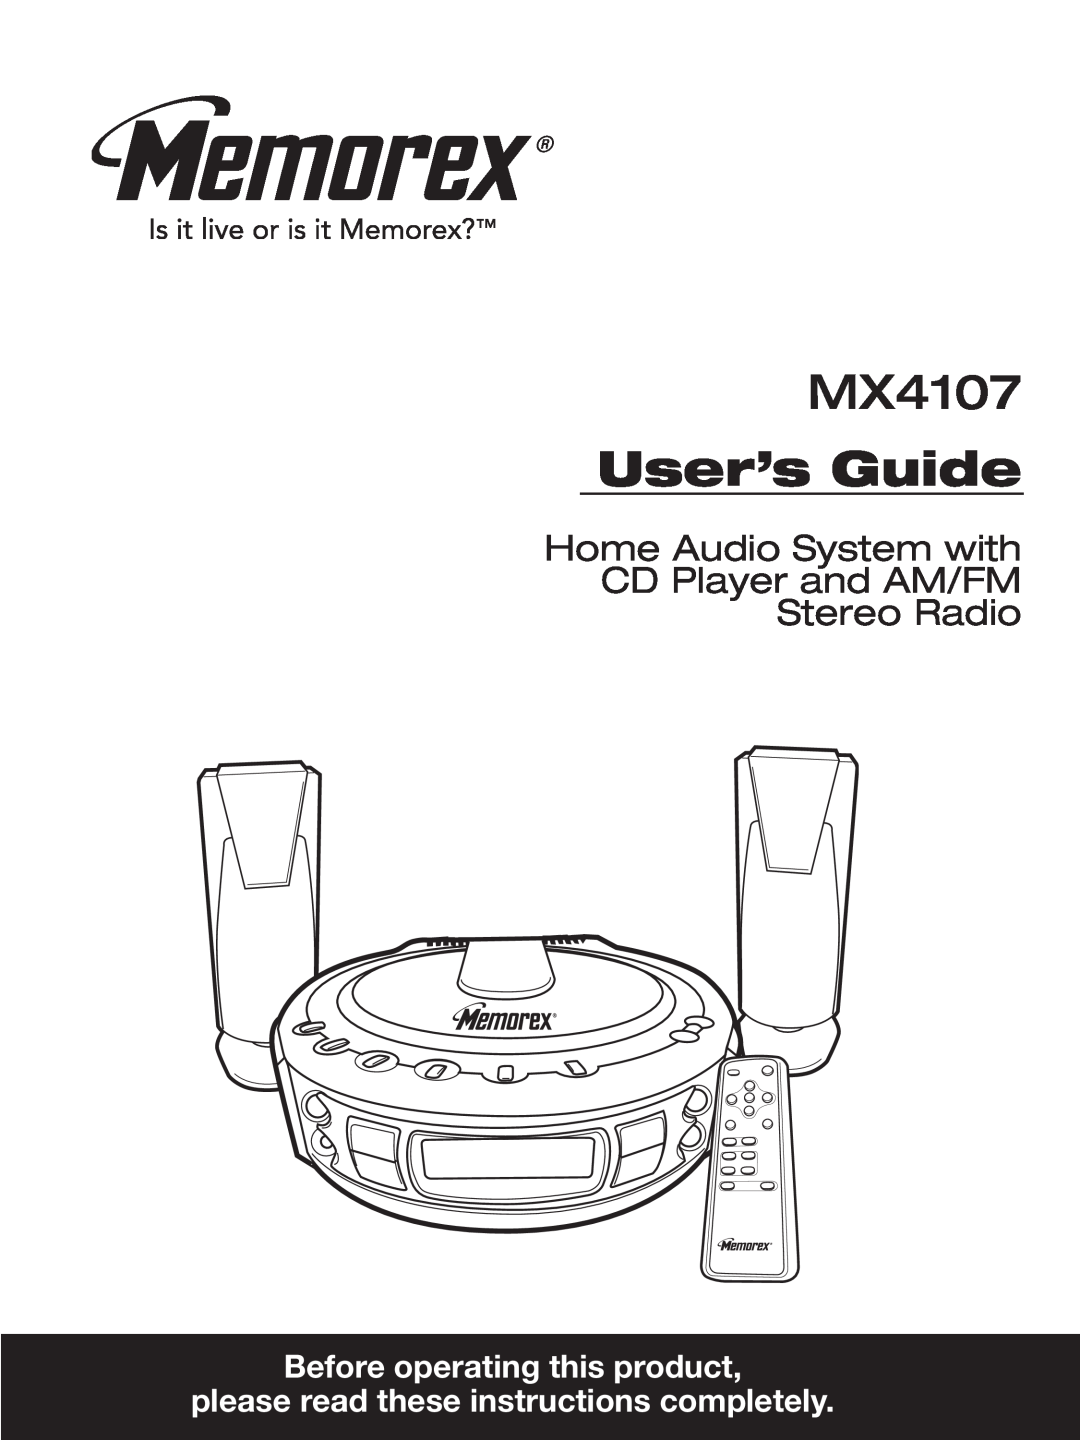 Memorex MX4107 manual User’s Guide, Before operating this product, please read these instructions completely 